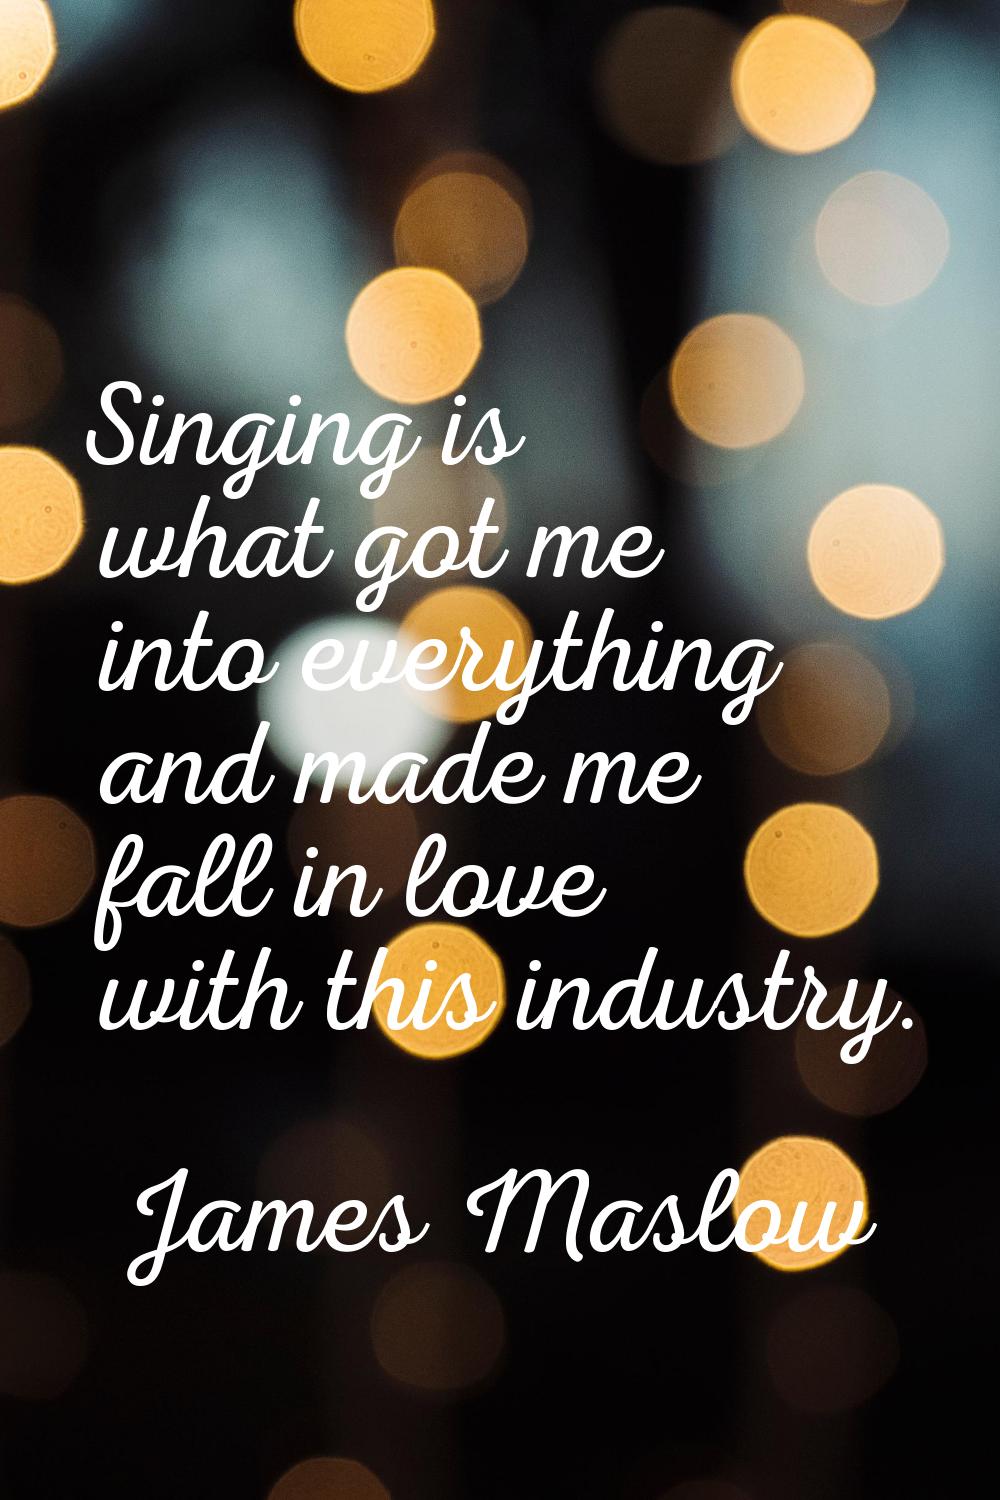 Singing is what got me into everything and made me fall in love with this industry.